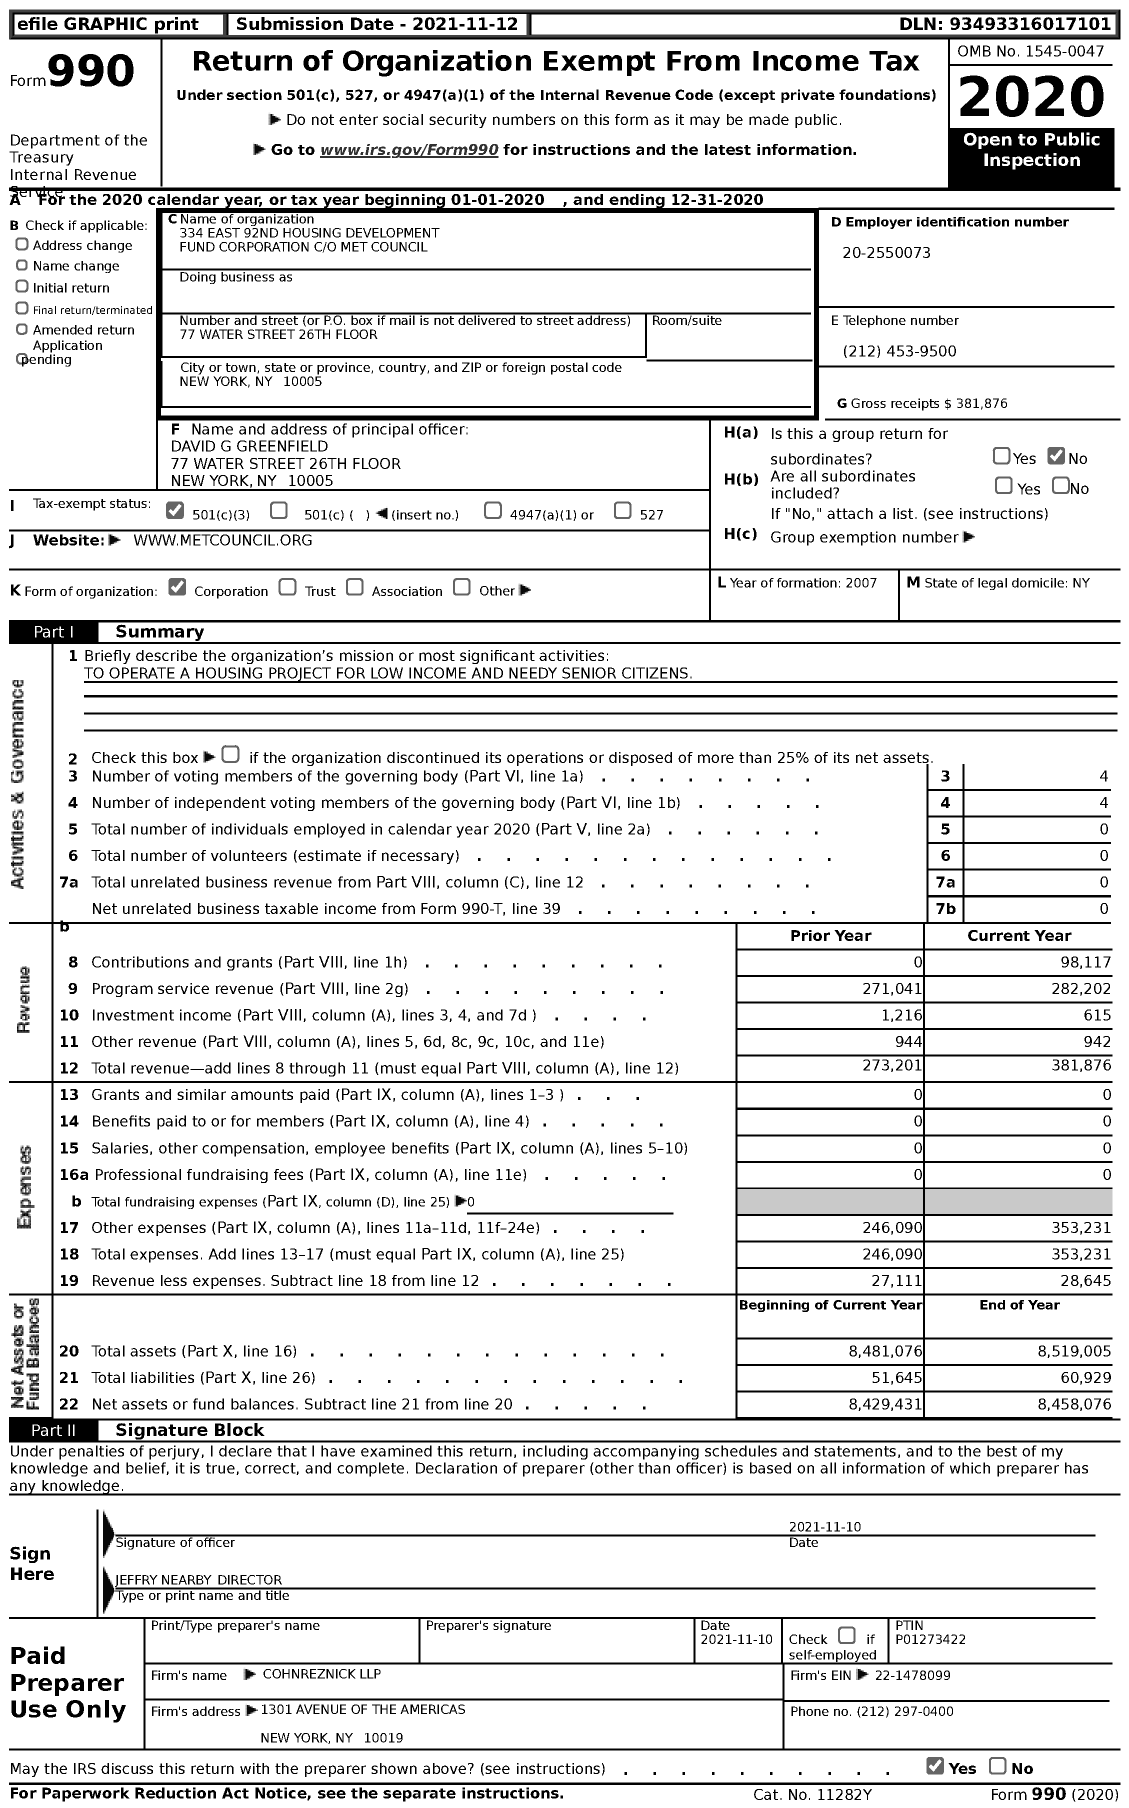 Image of first page of 2020 Form 990 for 334 East 92nd Housing Development FUND CORPORATION